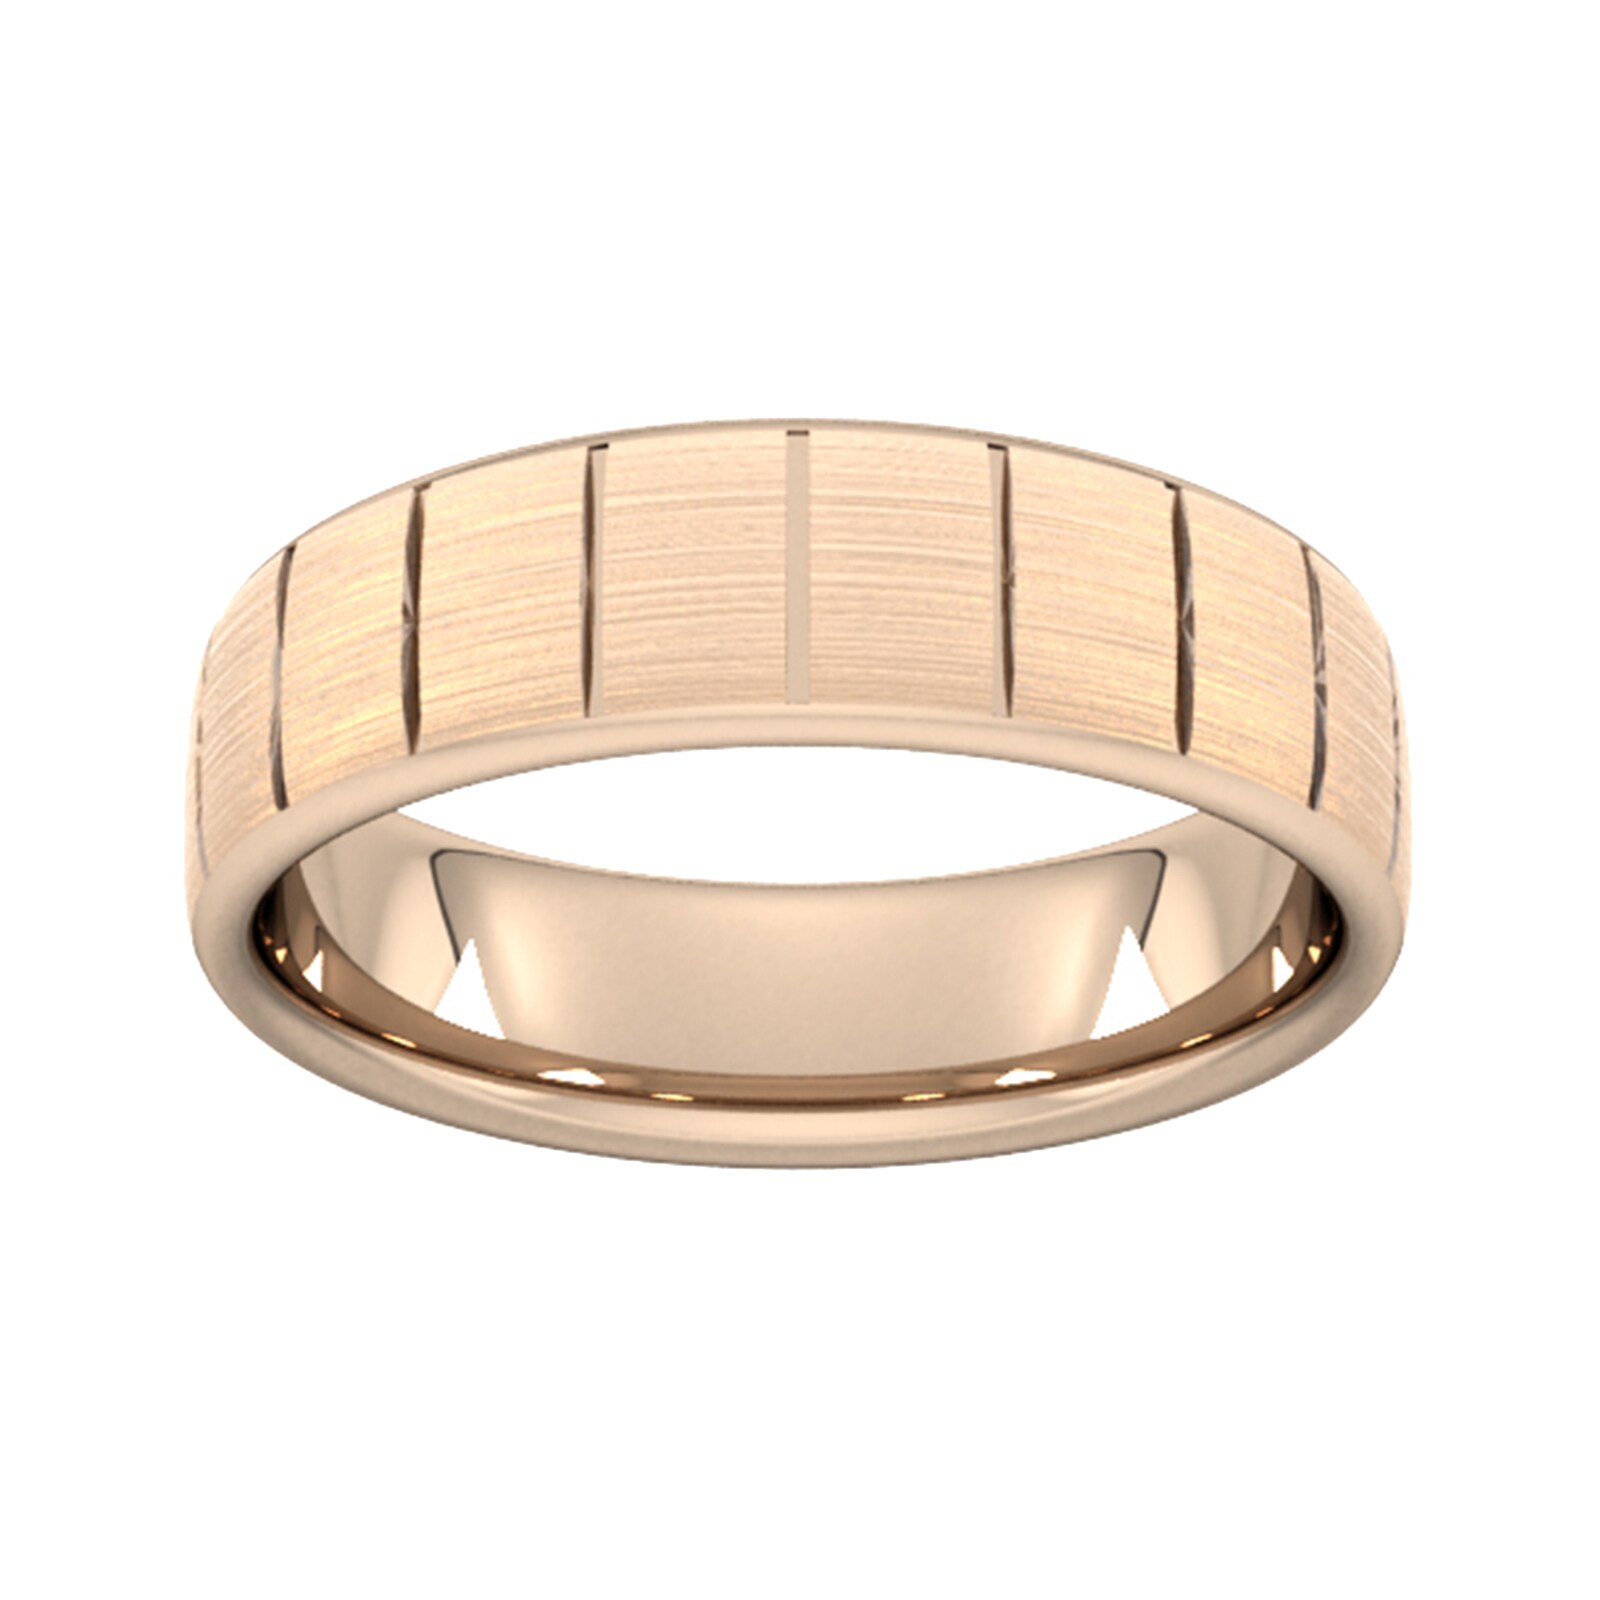 5mm flat court heavy vertical lines wedding ring in 18 carat rose gold - ring size q